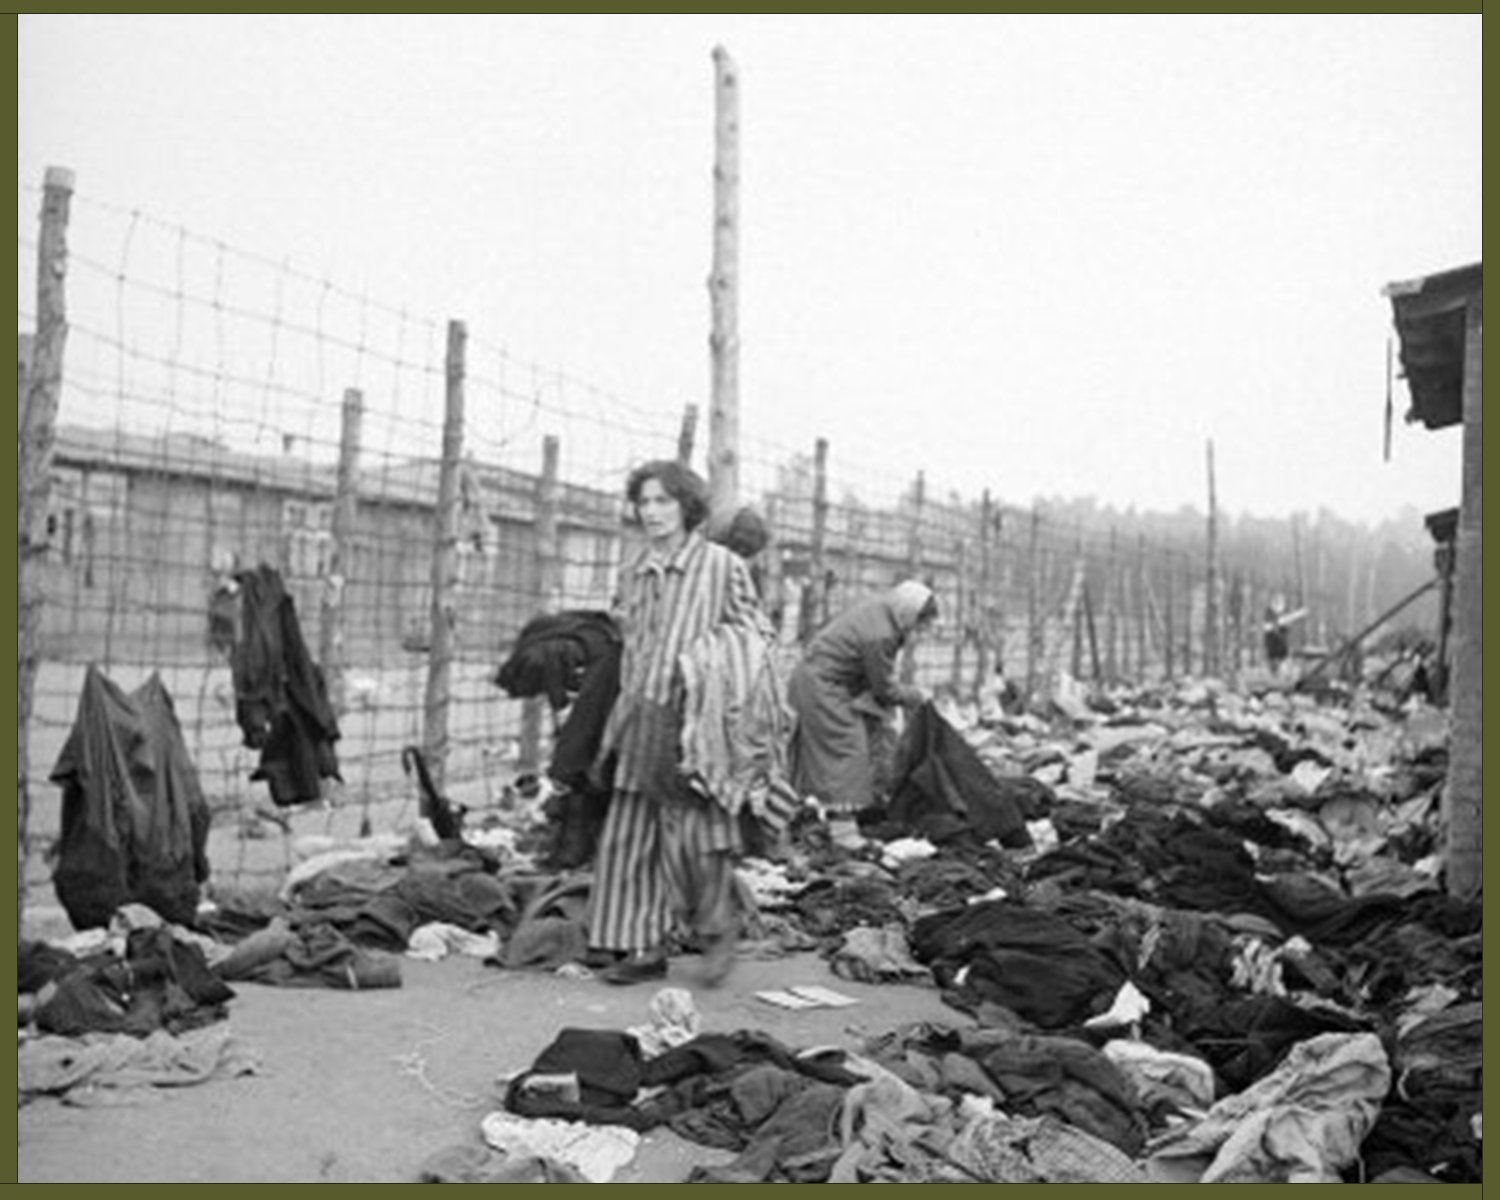 Prisoners at the newly liberated Bergen-Belsen concentration camp, 1945